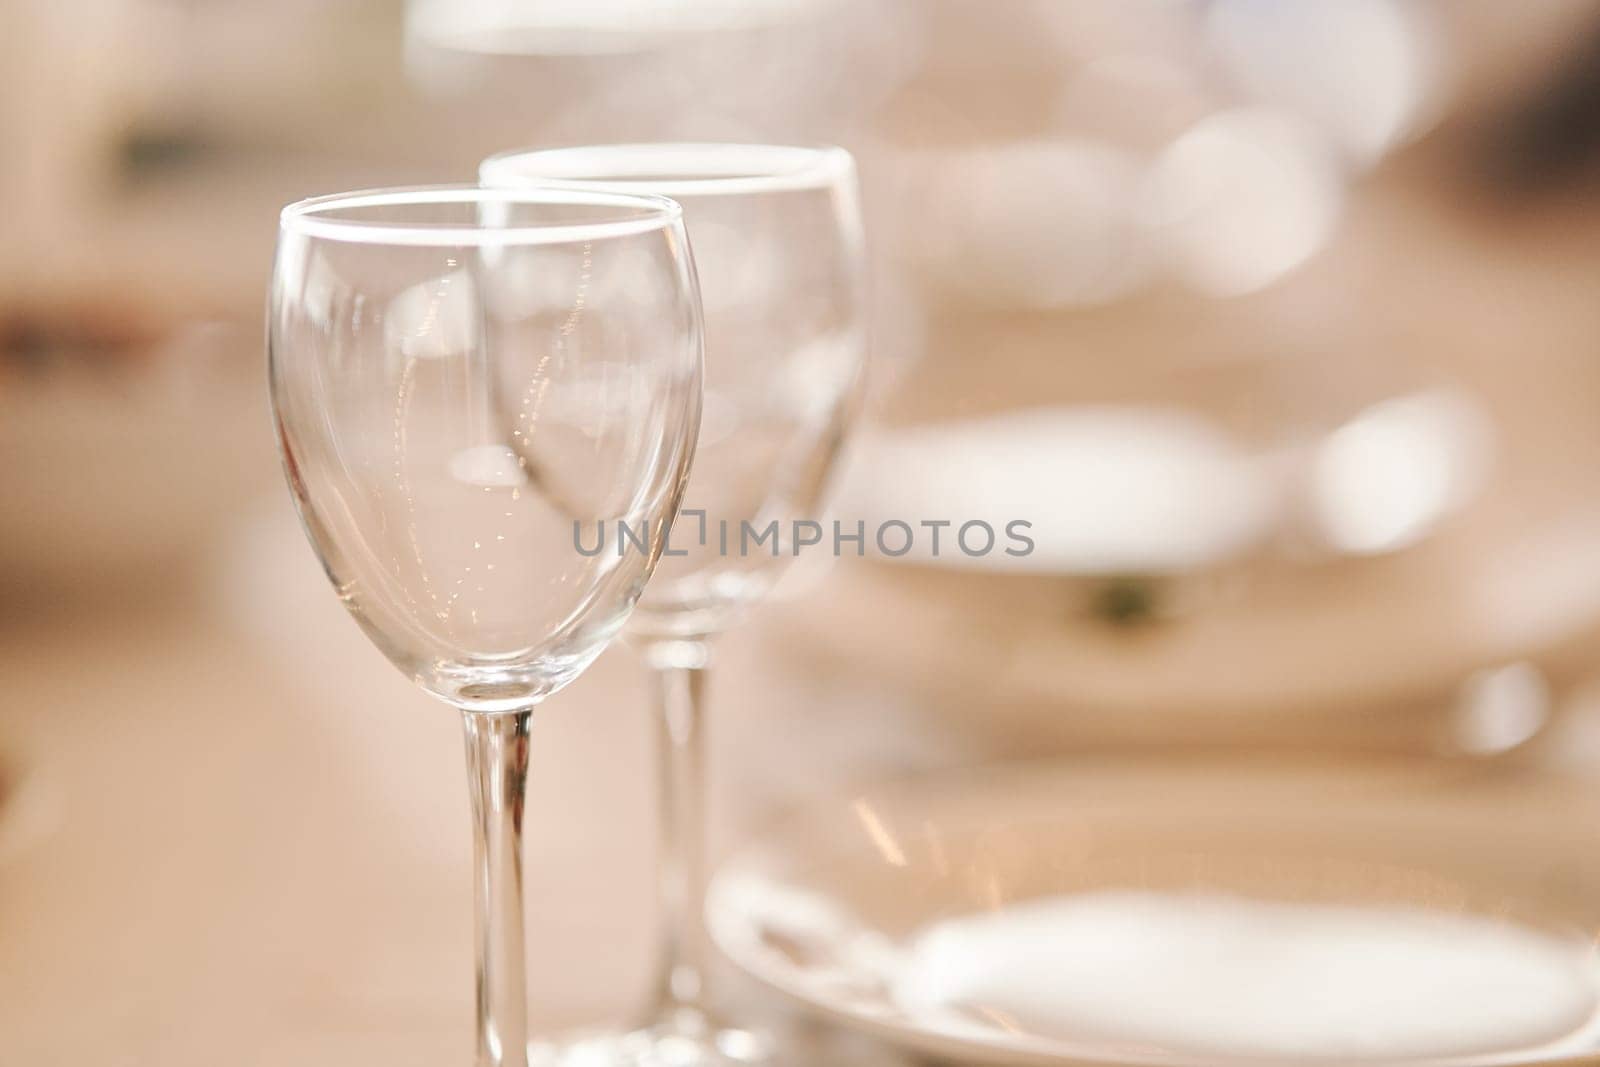 Table set for an event party or wedding reception. Banquet table design